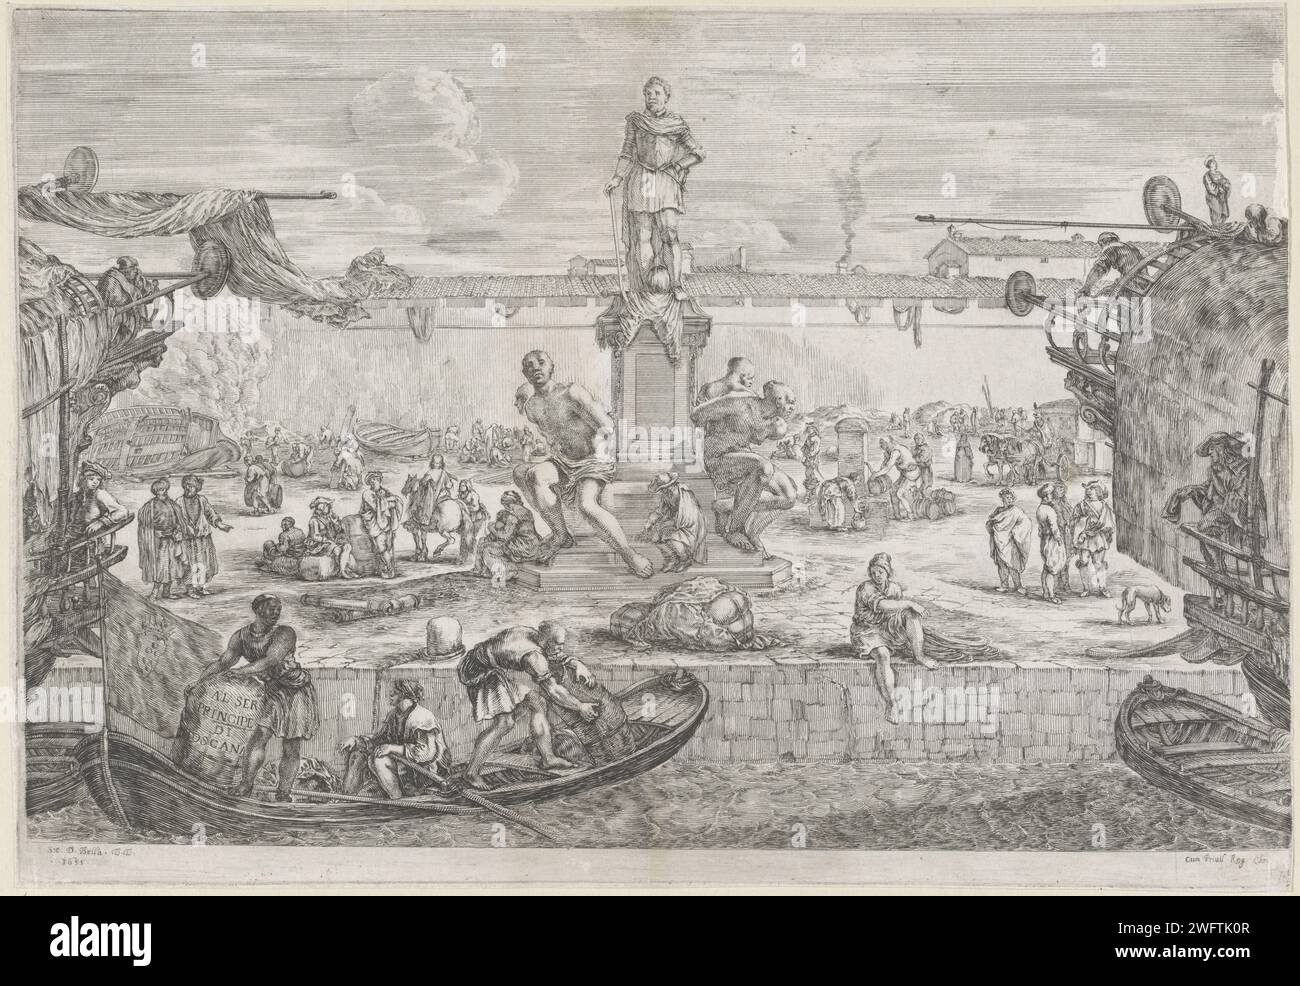 Standbeeld Van Ferdinand I in De Haven Van Livorno, Stefano Della Bella, After Giovanni Di Benedetto Bandini, After Pietro Tacca, 1655 print View of the port of Livorno with the statue of Ferdinand I, Grand Duke of Tuscany, with on the corners the images of the four slavy 'Moors' (I Quattro Mori). On the quay there are traders, port workers and sailors. Left and right two backs of moored ships. print maker: Italyafter own design by: Italyafter sculpture by: Livornoafter sculpture by: Livorno paper etching harbour. piece of sculpture, reproduction of a piece of sculpture. dock labourer. merchan Stock Photo